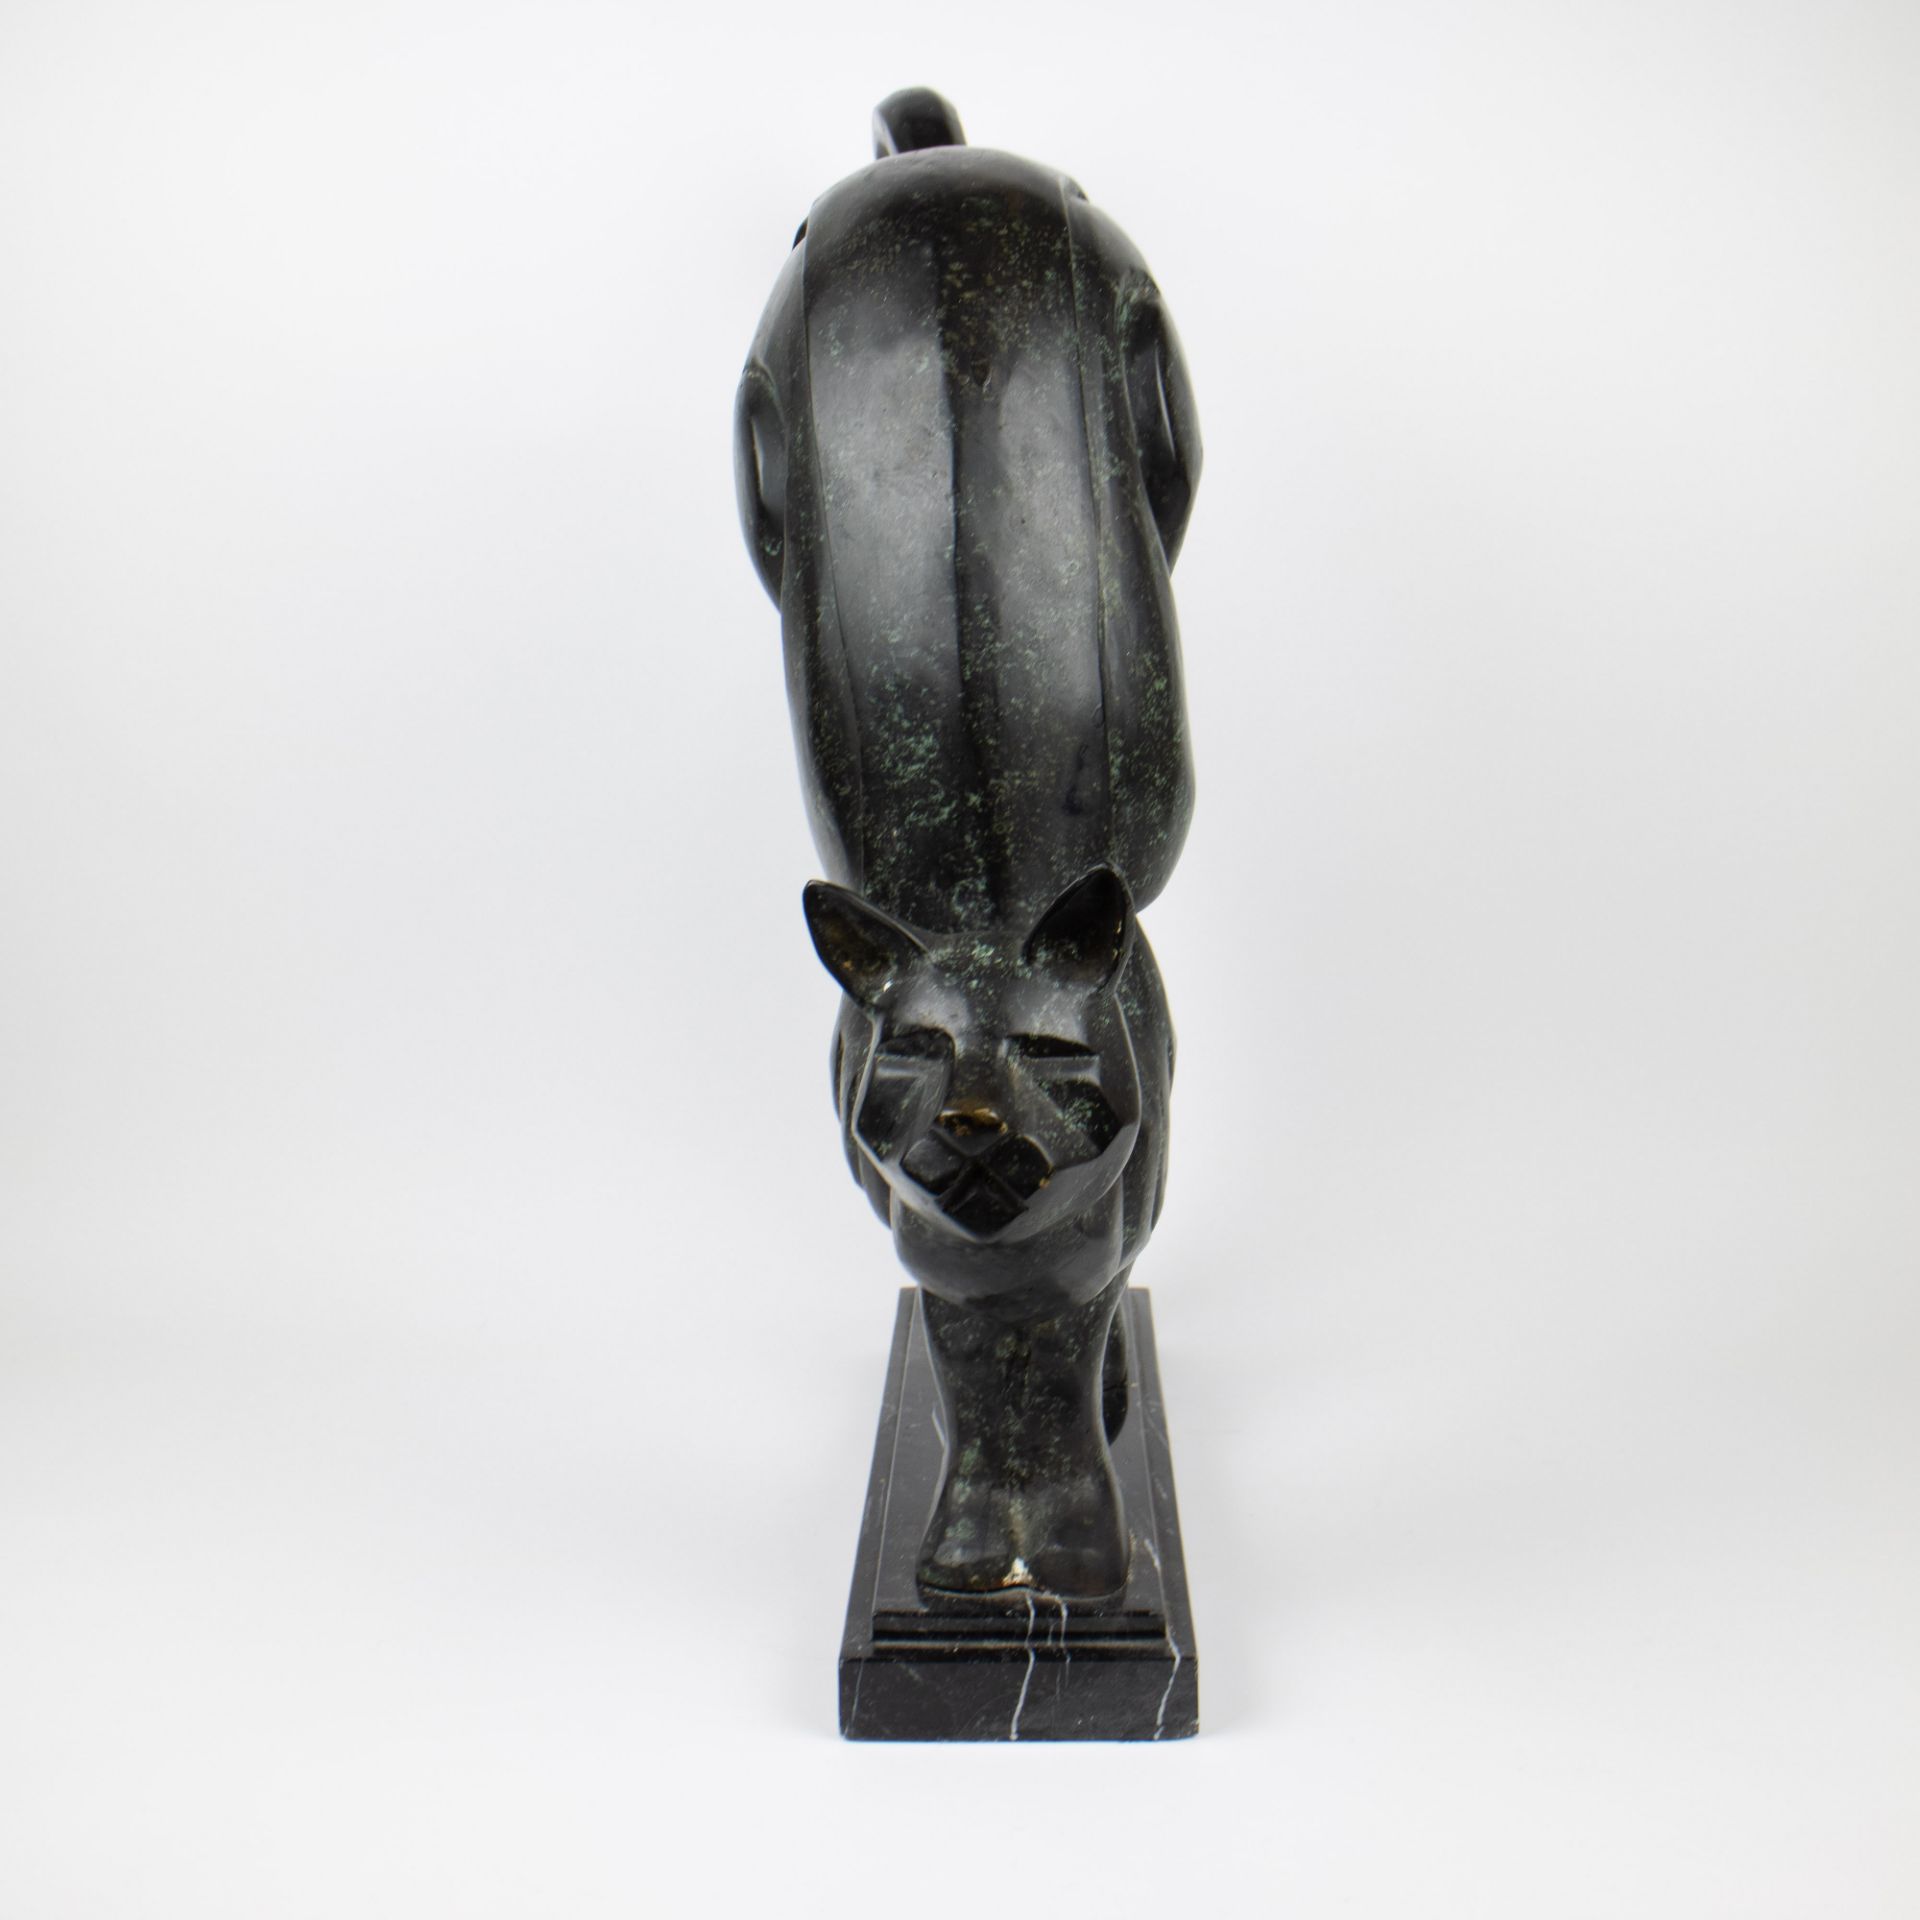 A bronze sculpture of a cat on marble base. - Image 2 of 5